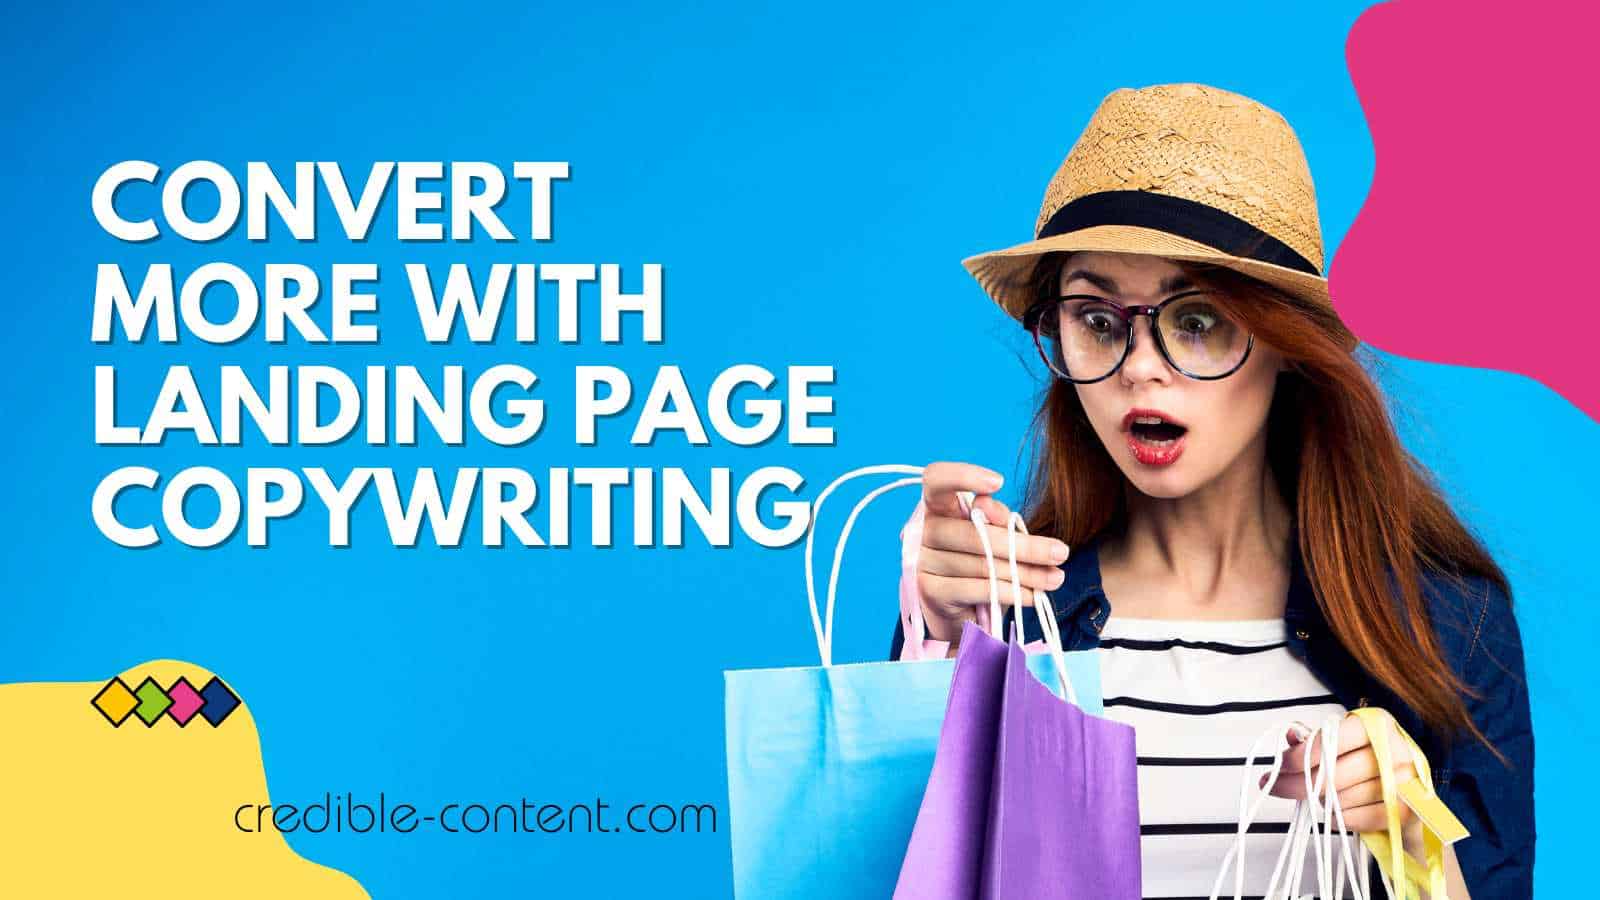 Convert more with landing page copywriting services